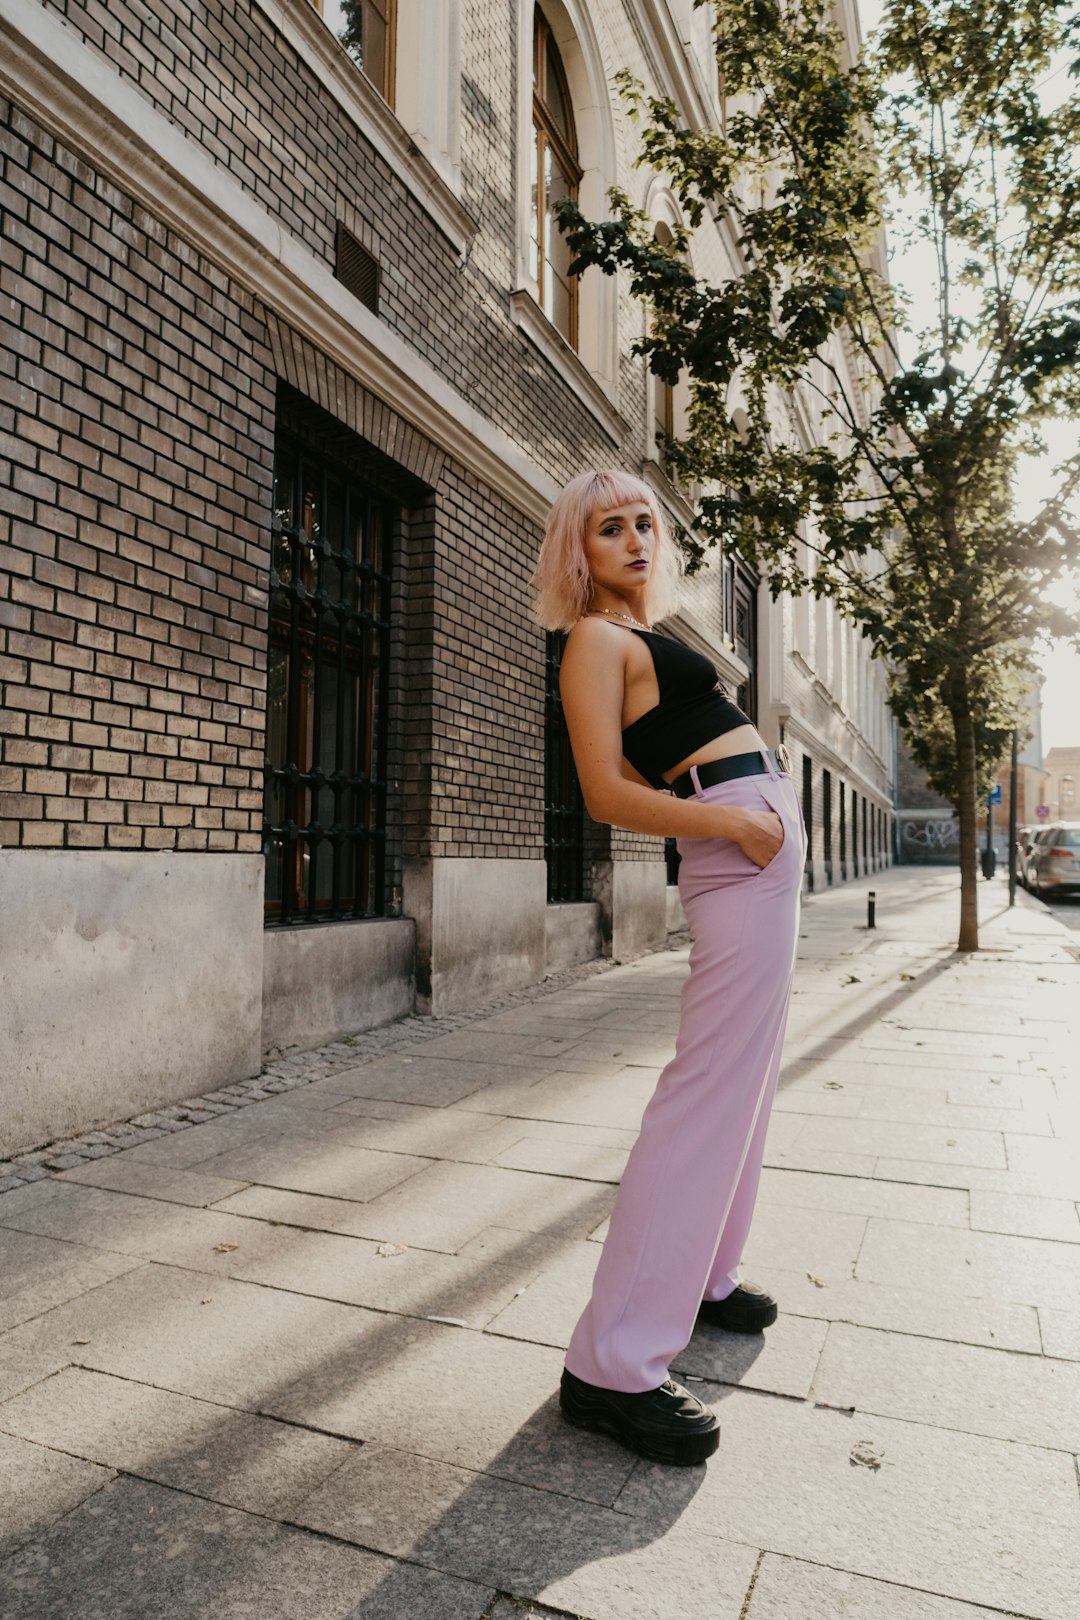 woman in black tank top and pink pants standing on sidewalk during daytime